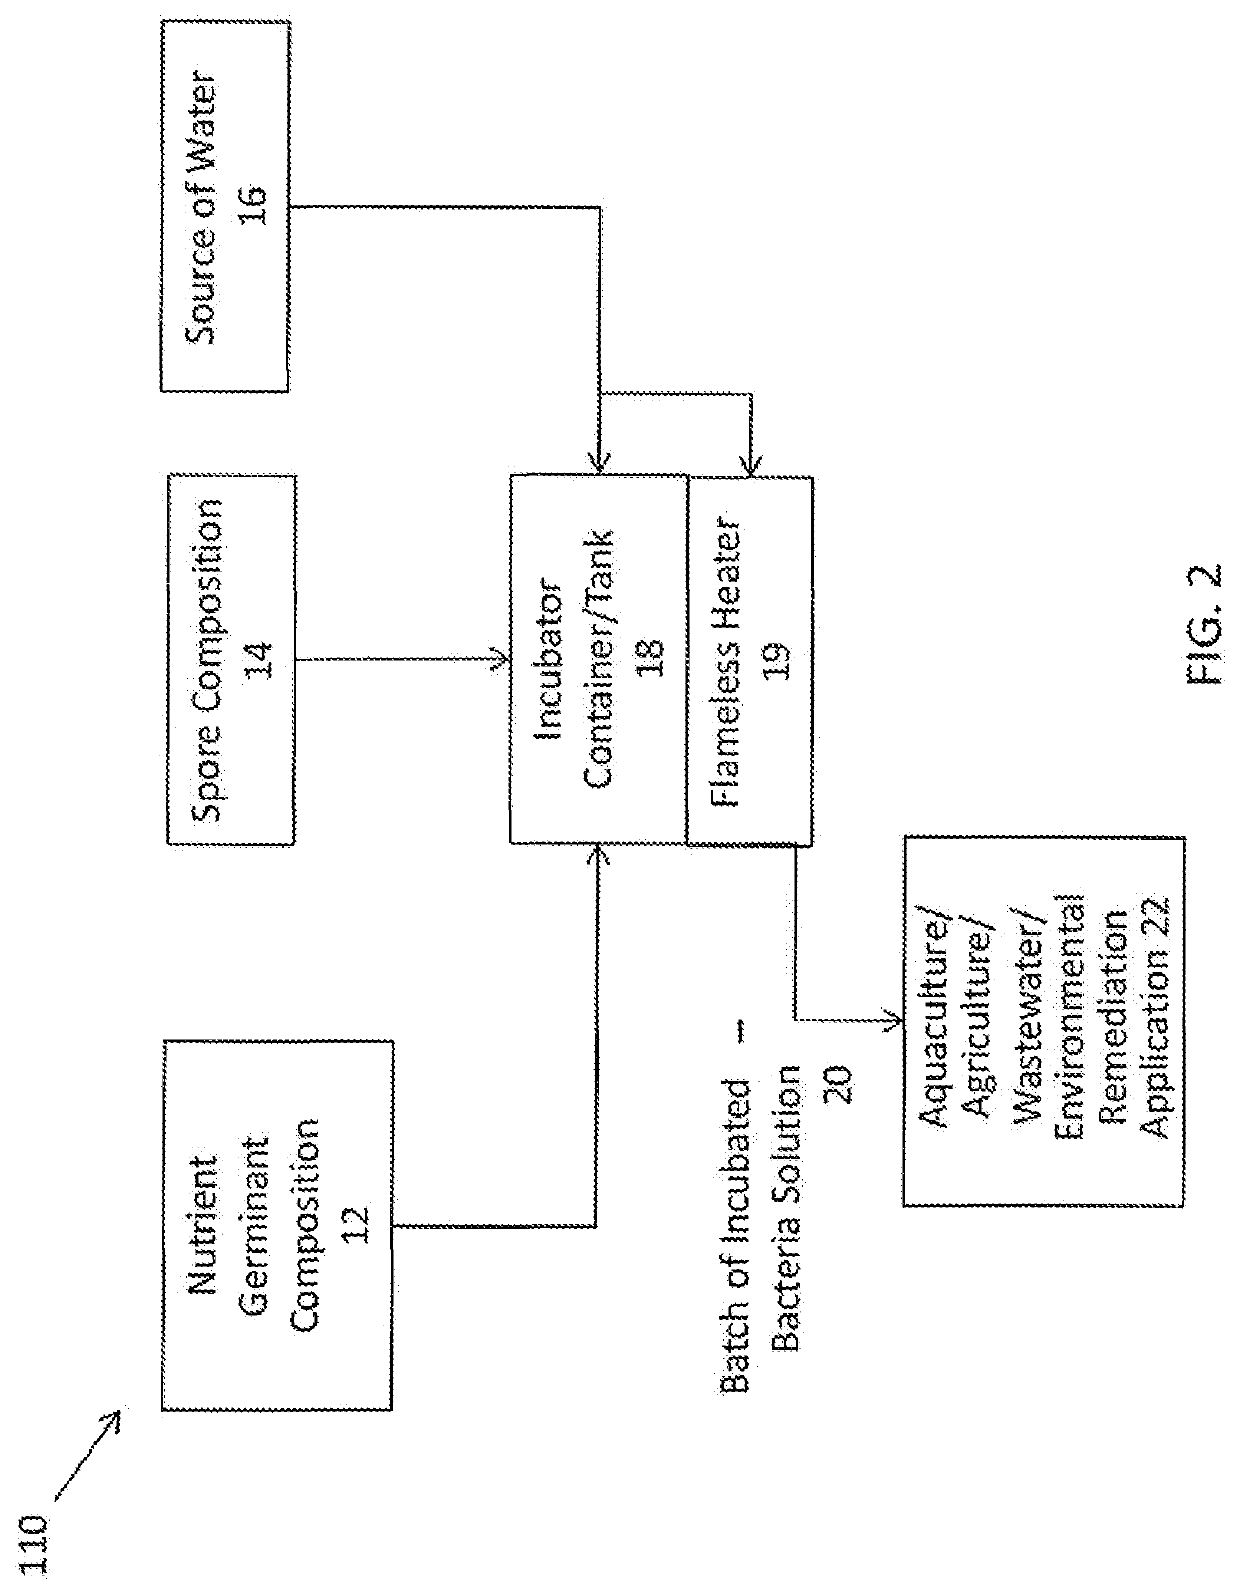 System, method, and composition for incubating spores for use in aquaculture, agriculture, wastewater, and environmental remediation applications